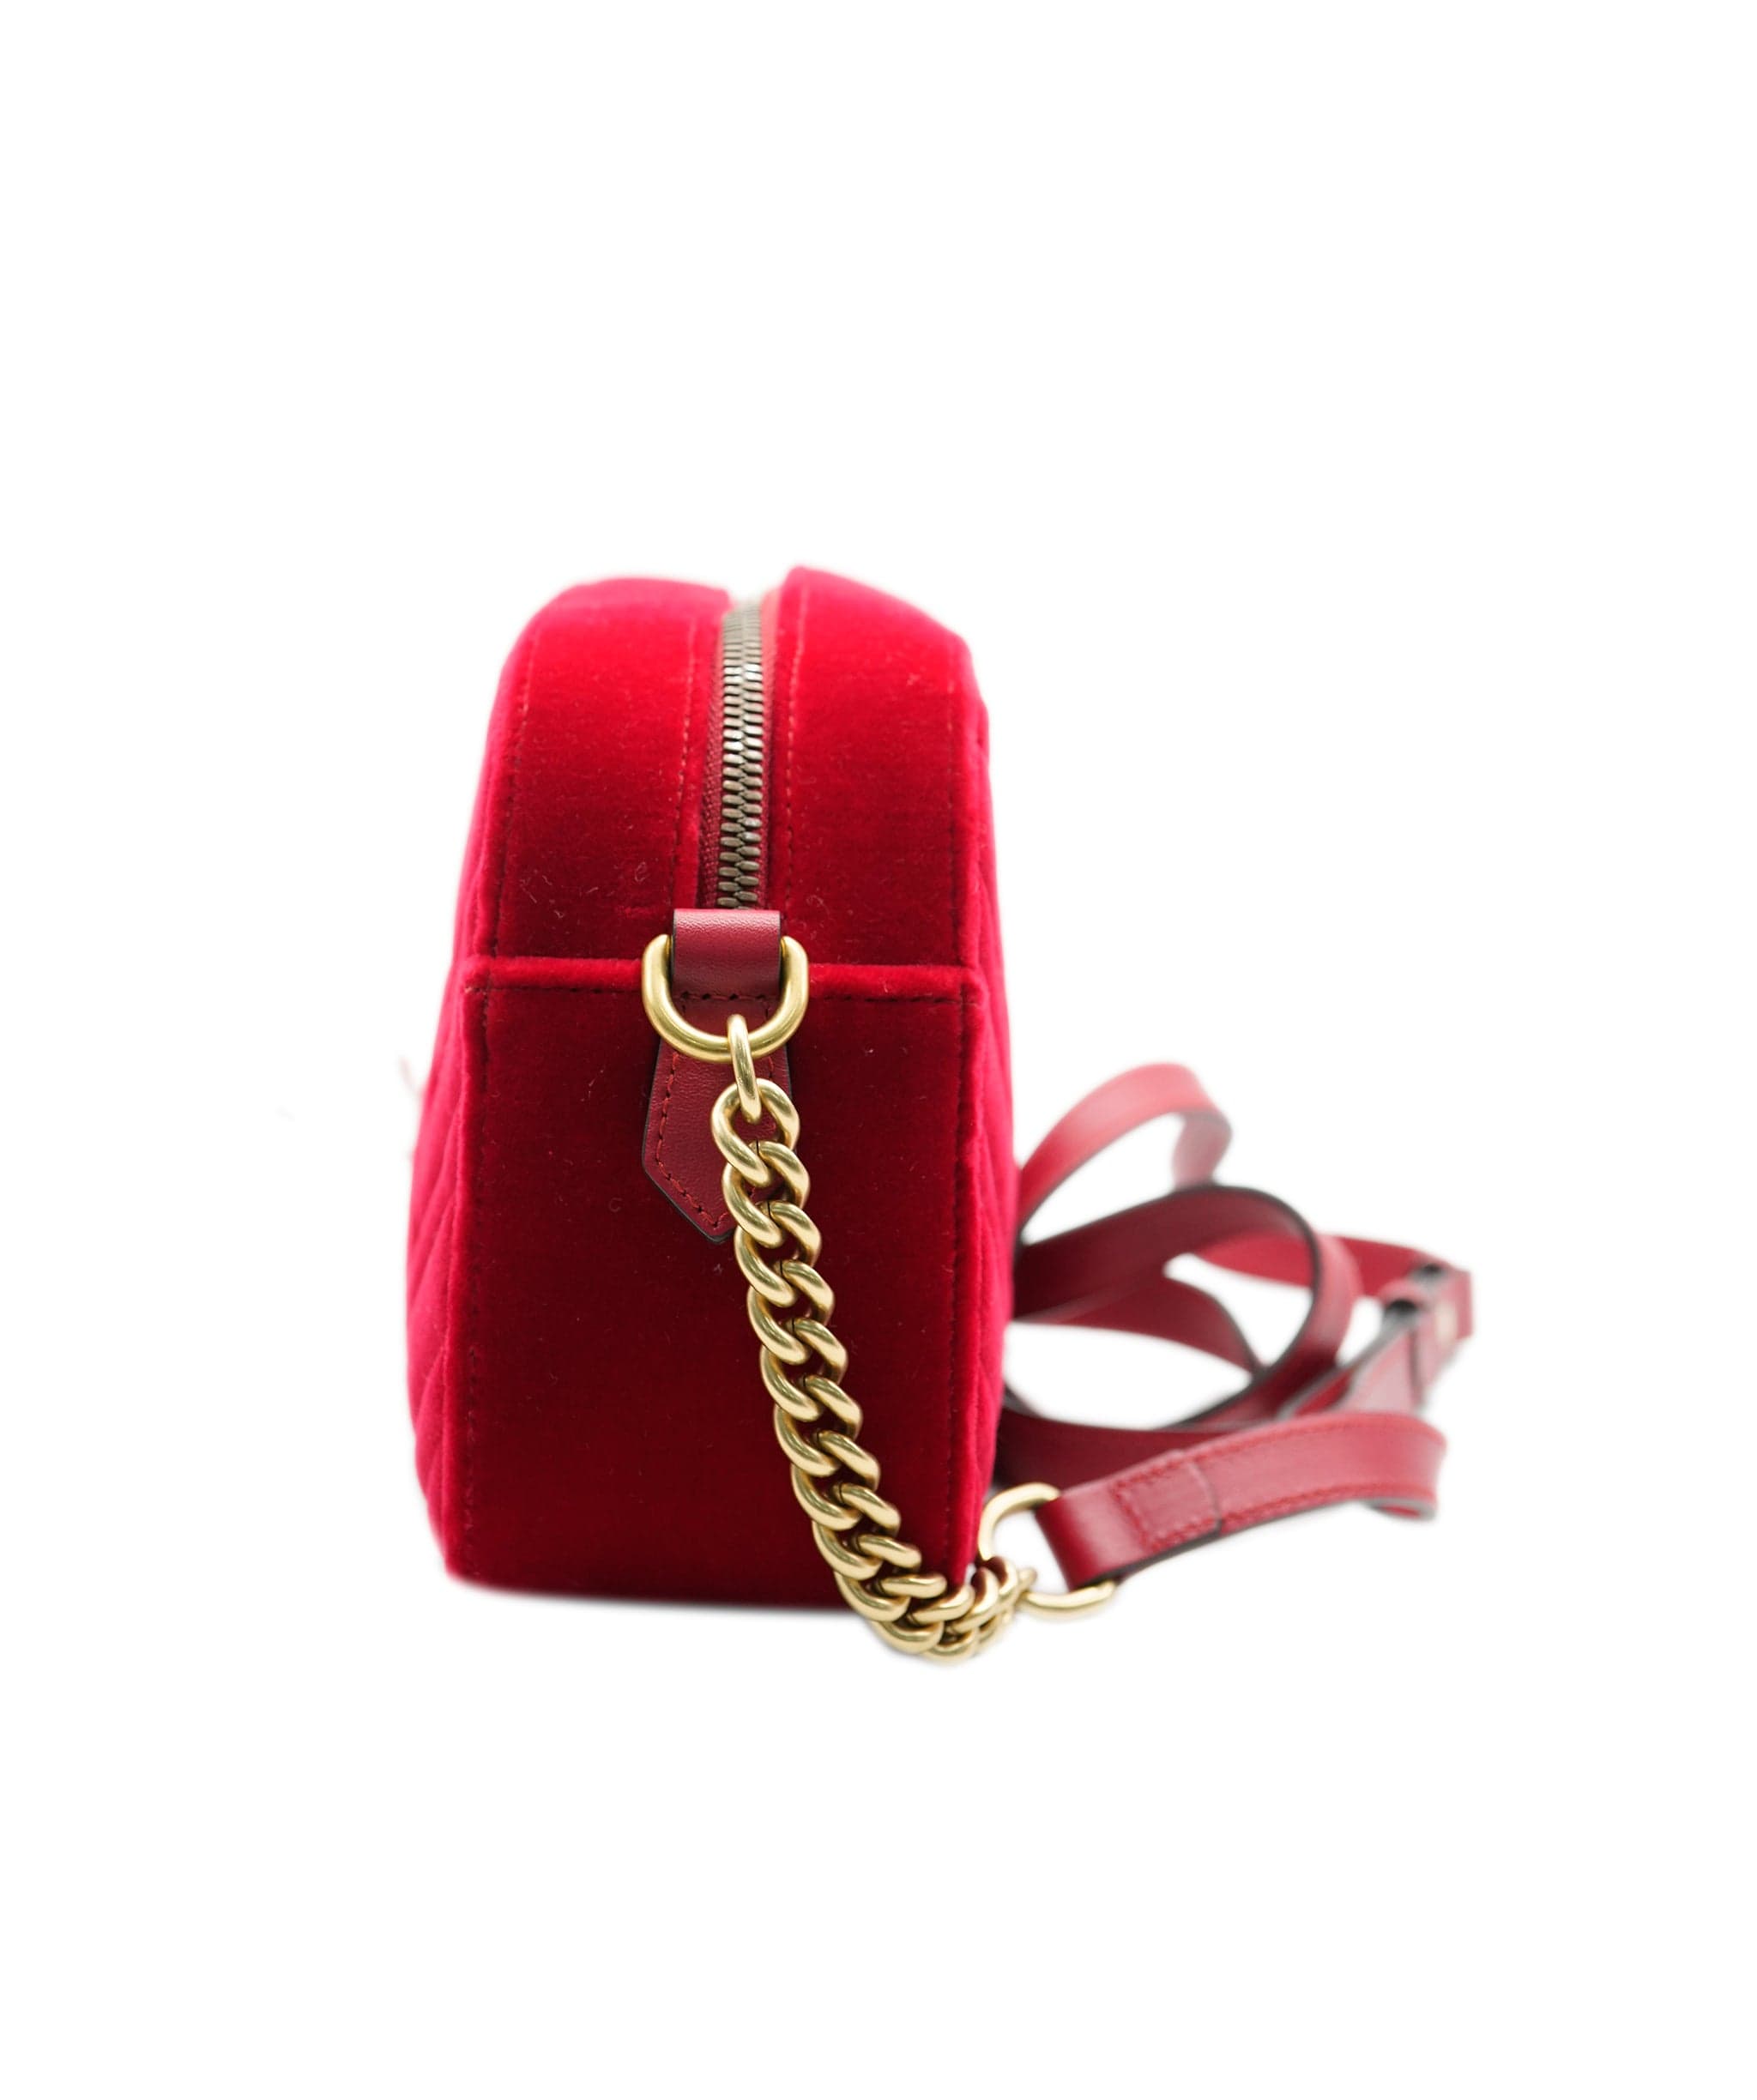 Gucci Gucci red velvet marmont camera bag with GHW  - AJC0270